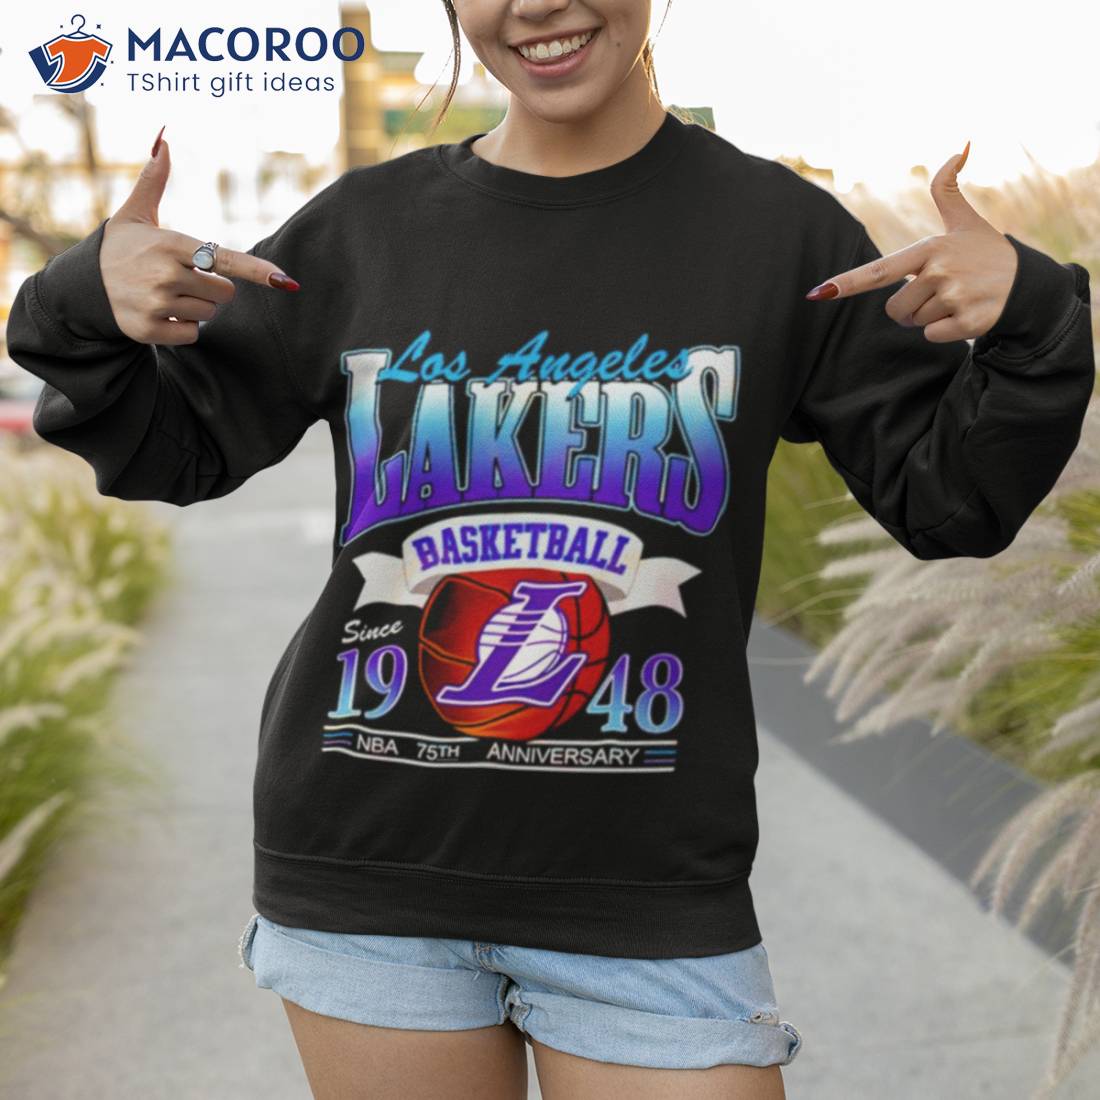 Los Angeles Lakers Basketball Since 1948 Unisex T-Shirt